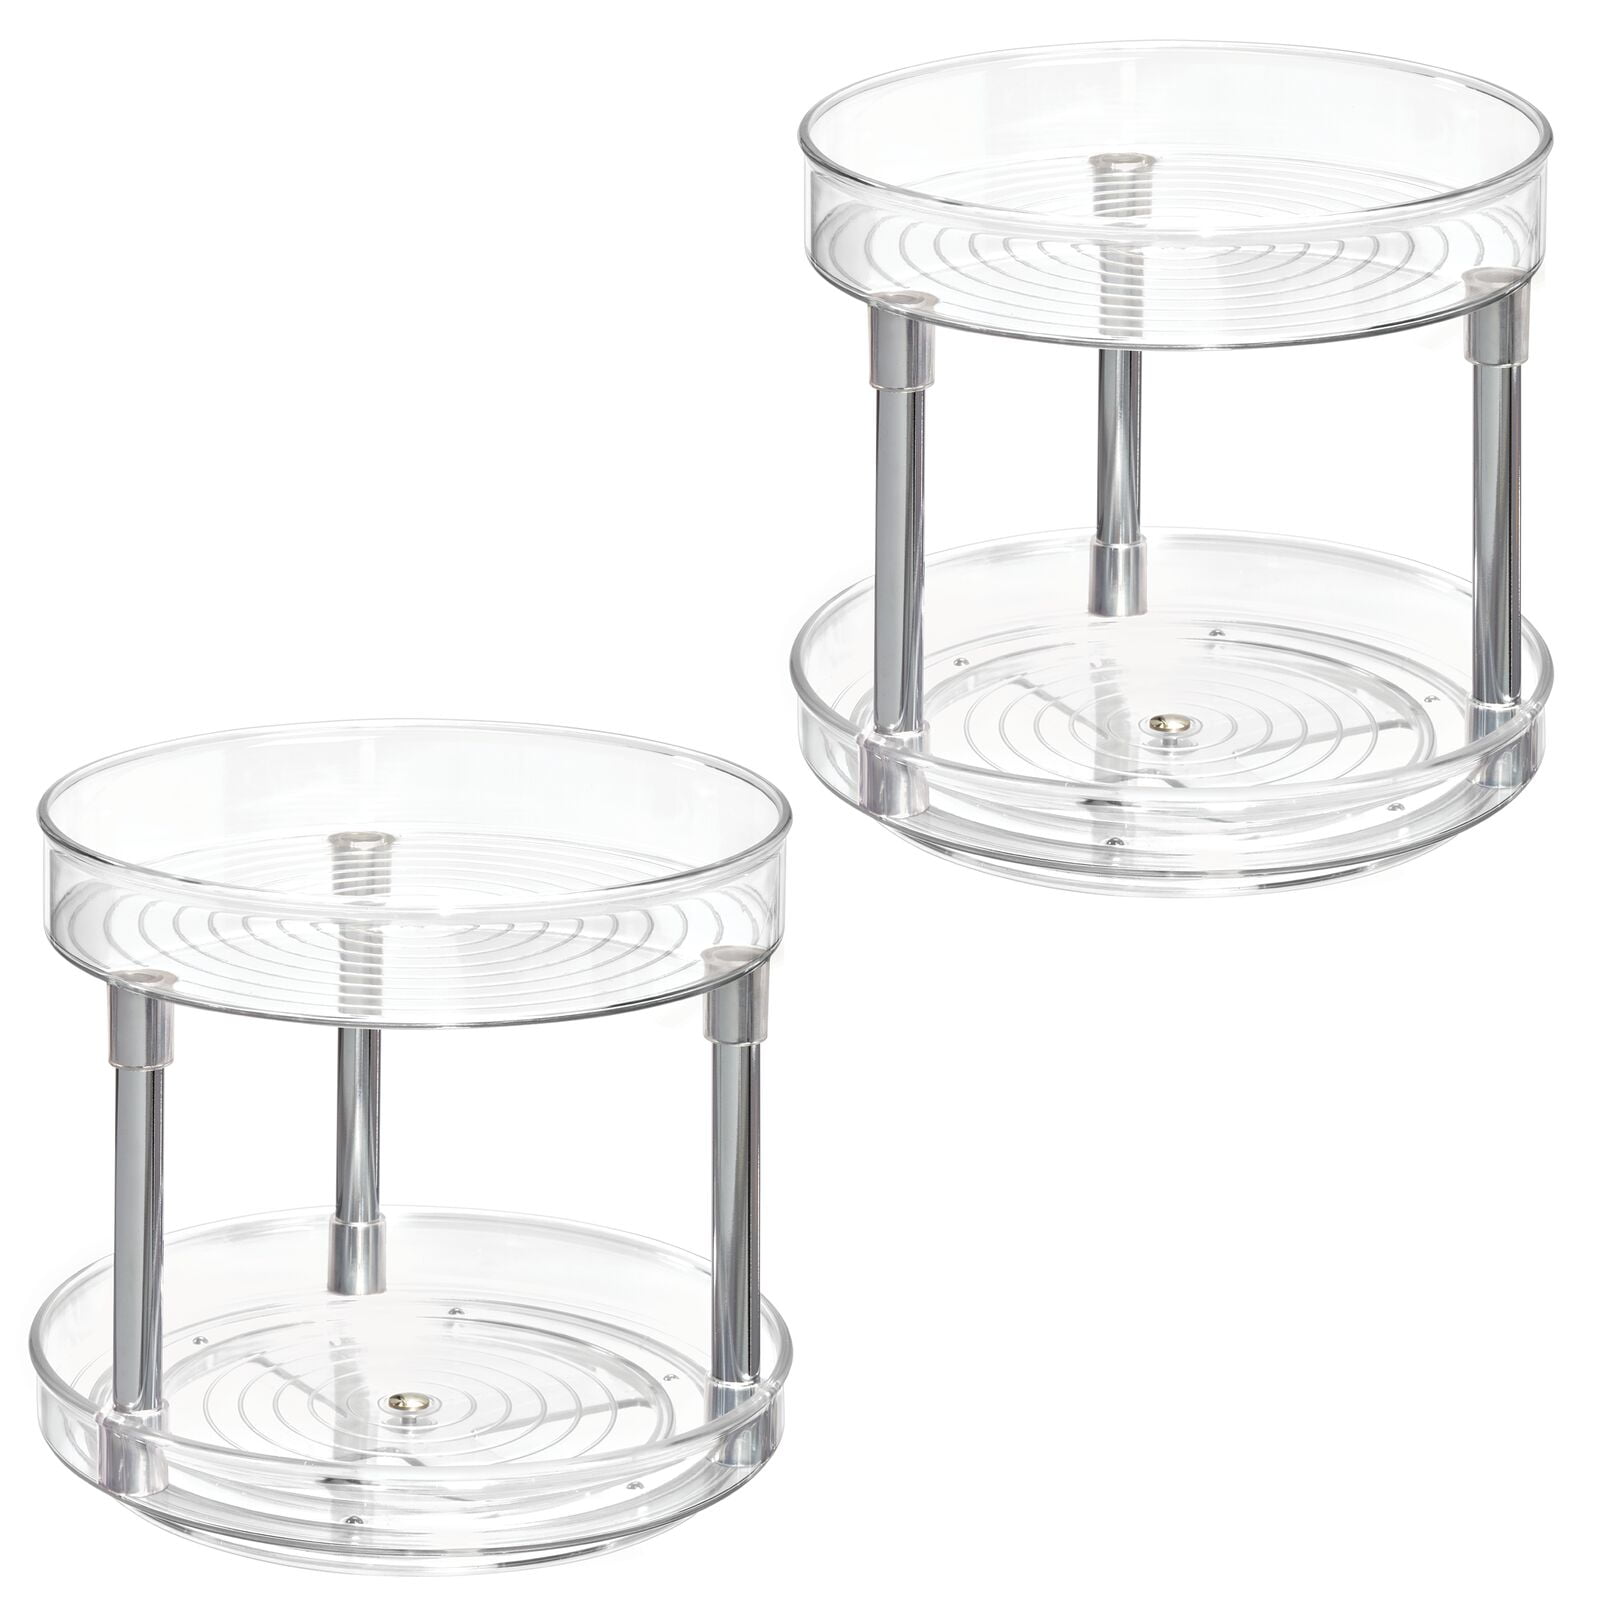 Pantry, mDesign 2-Tier Lazy Susan Turntable Food Storage Container for Cabinets 